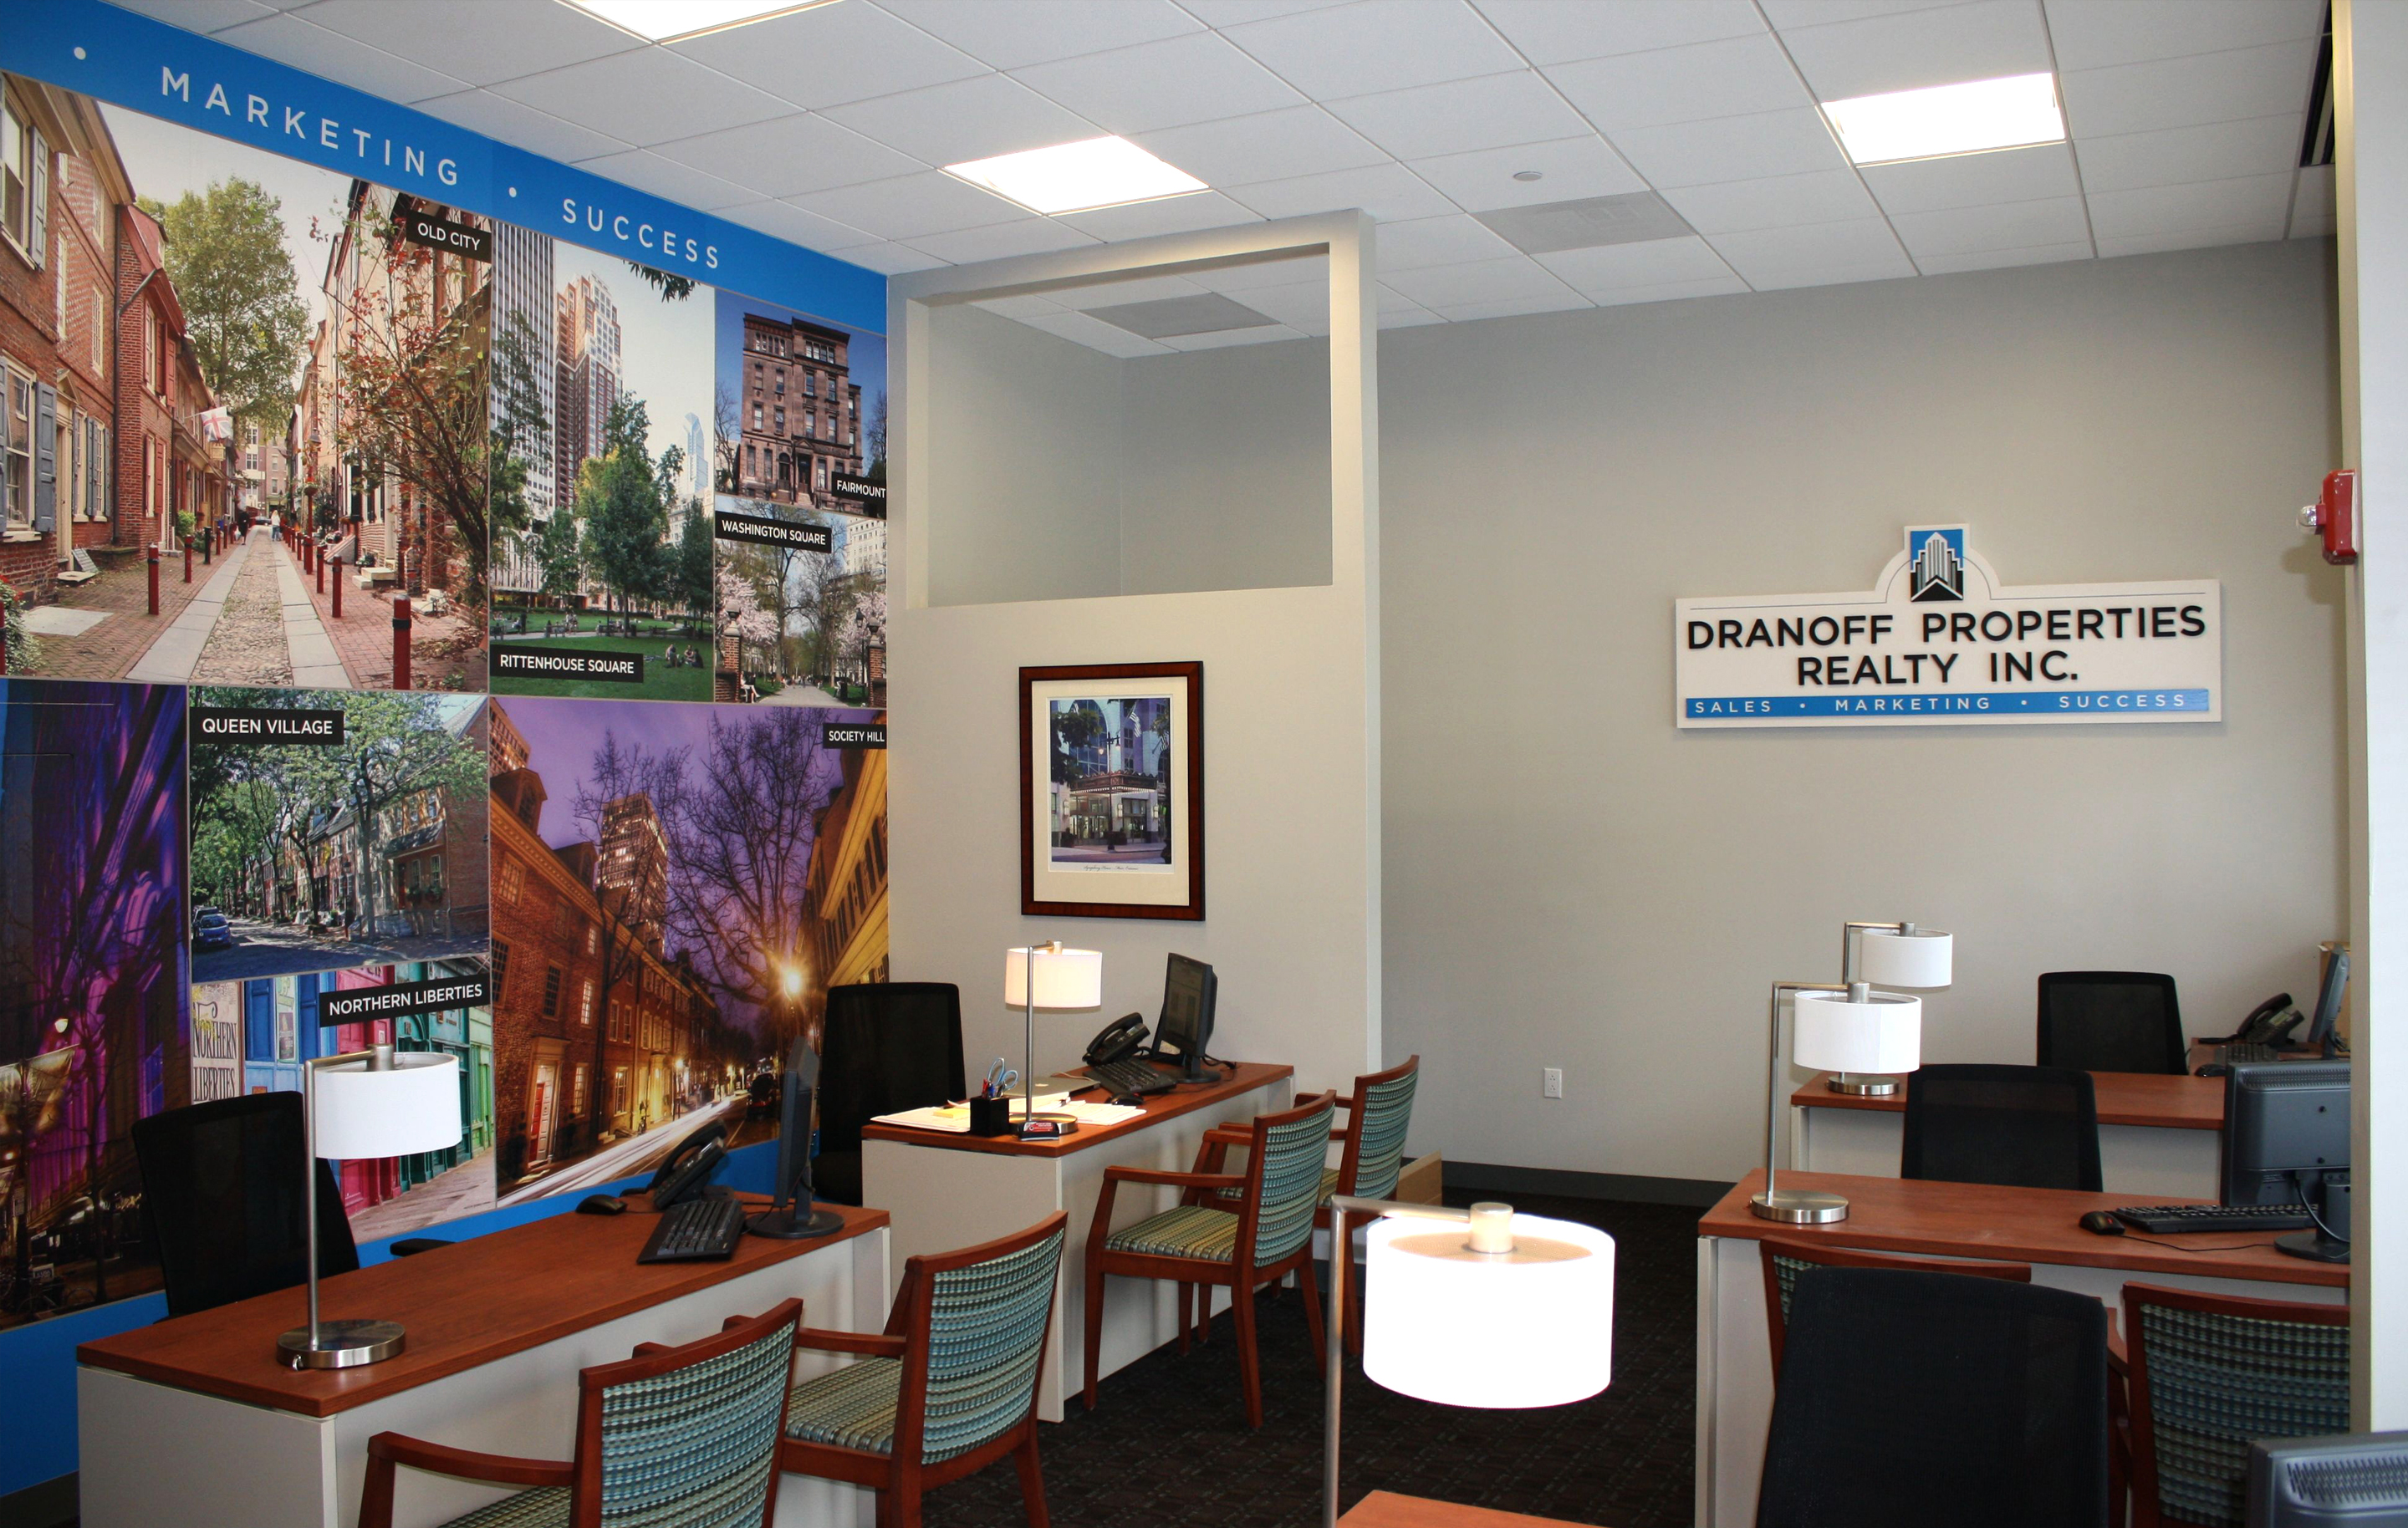 Dranoff Realty sales office by advertising agency in Philadelphia